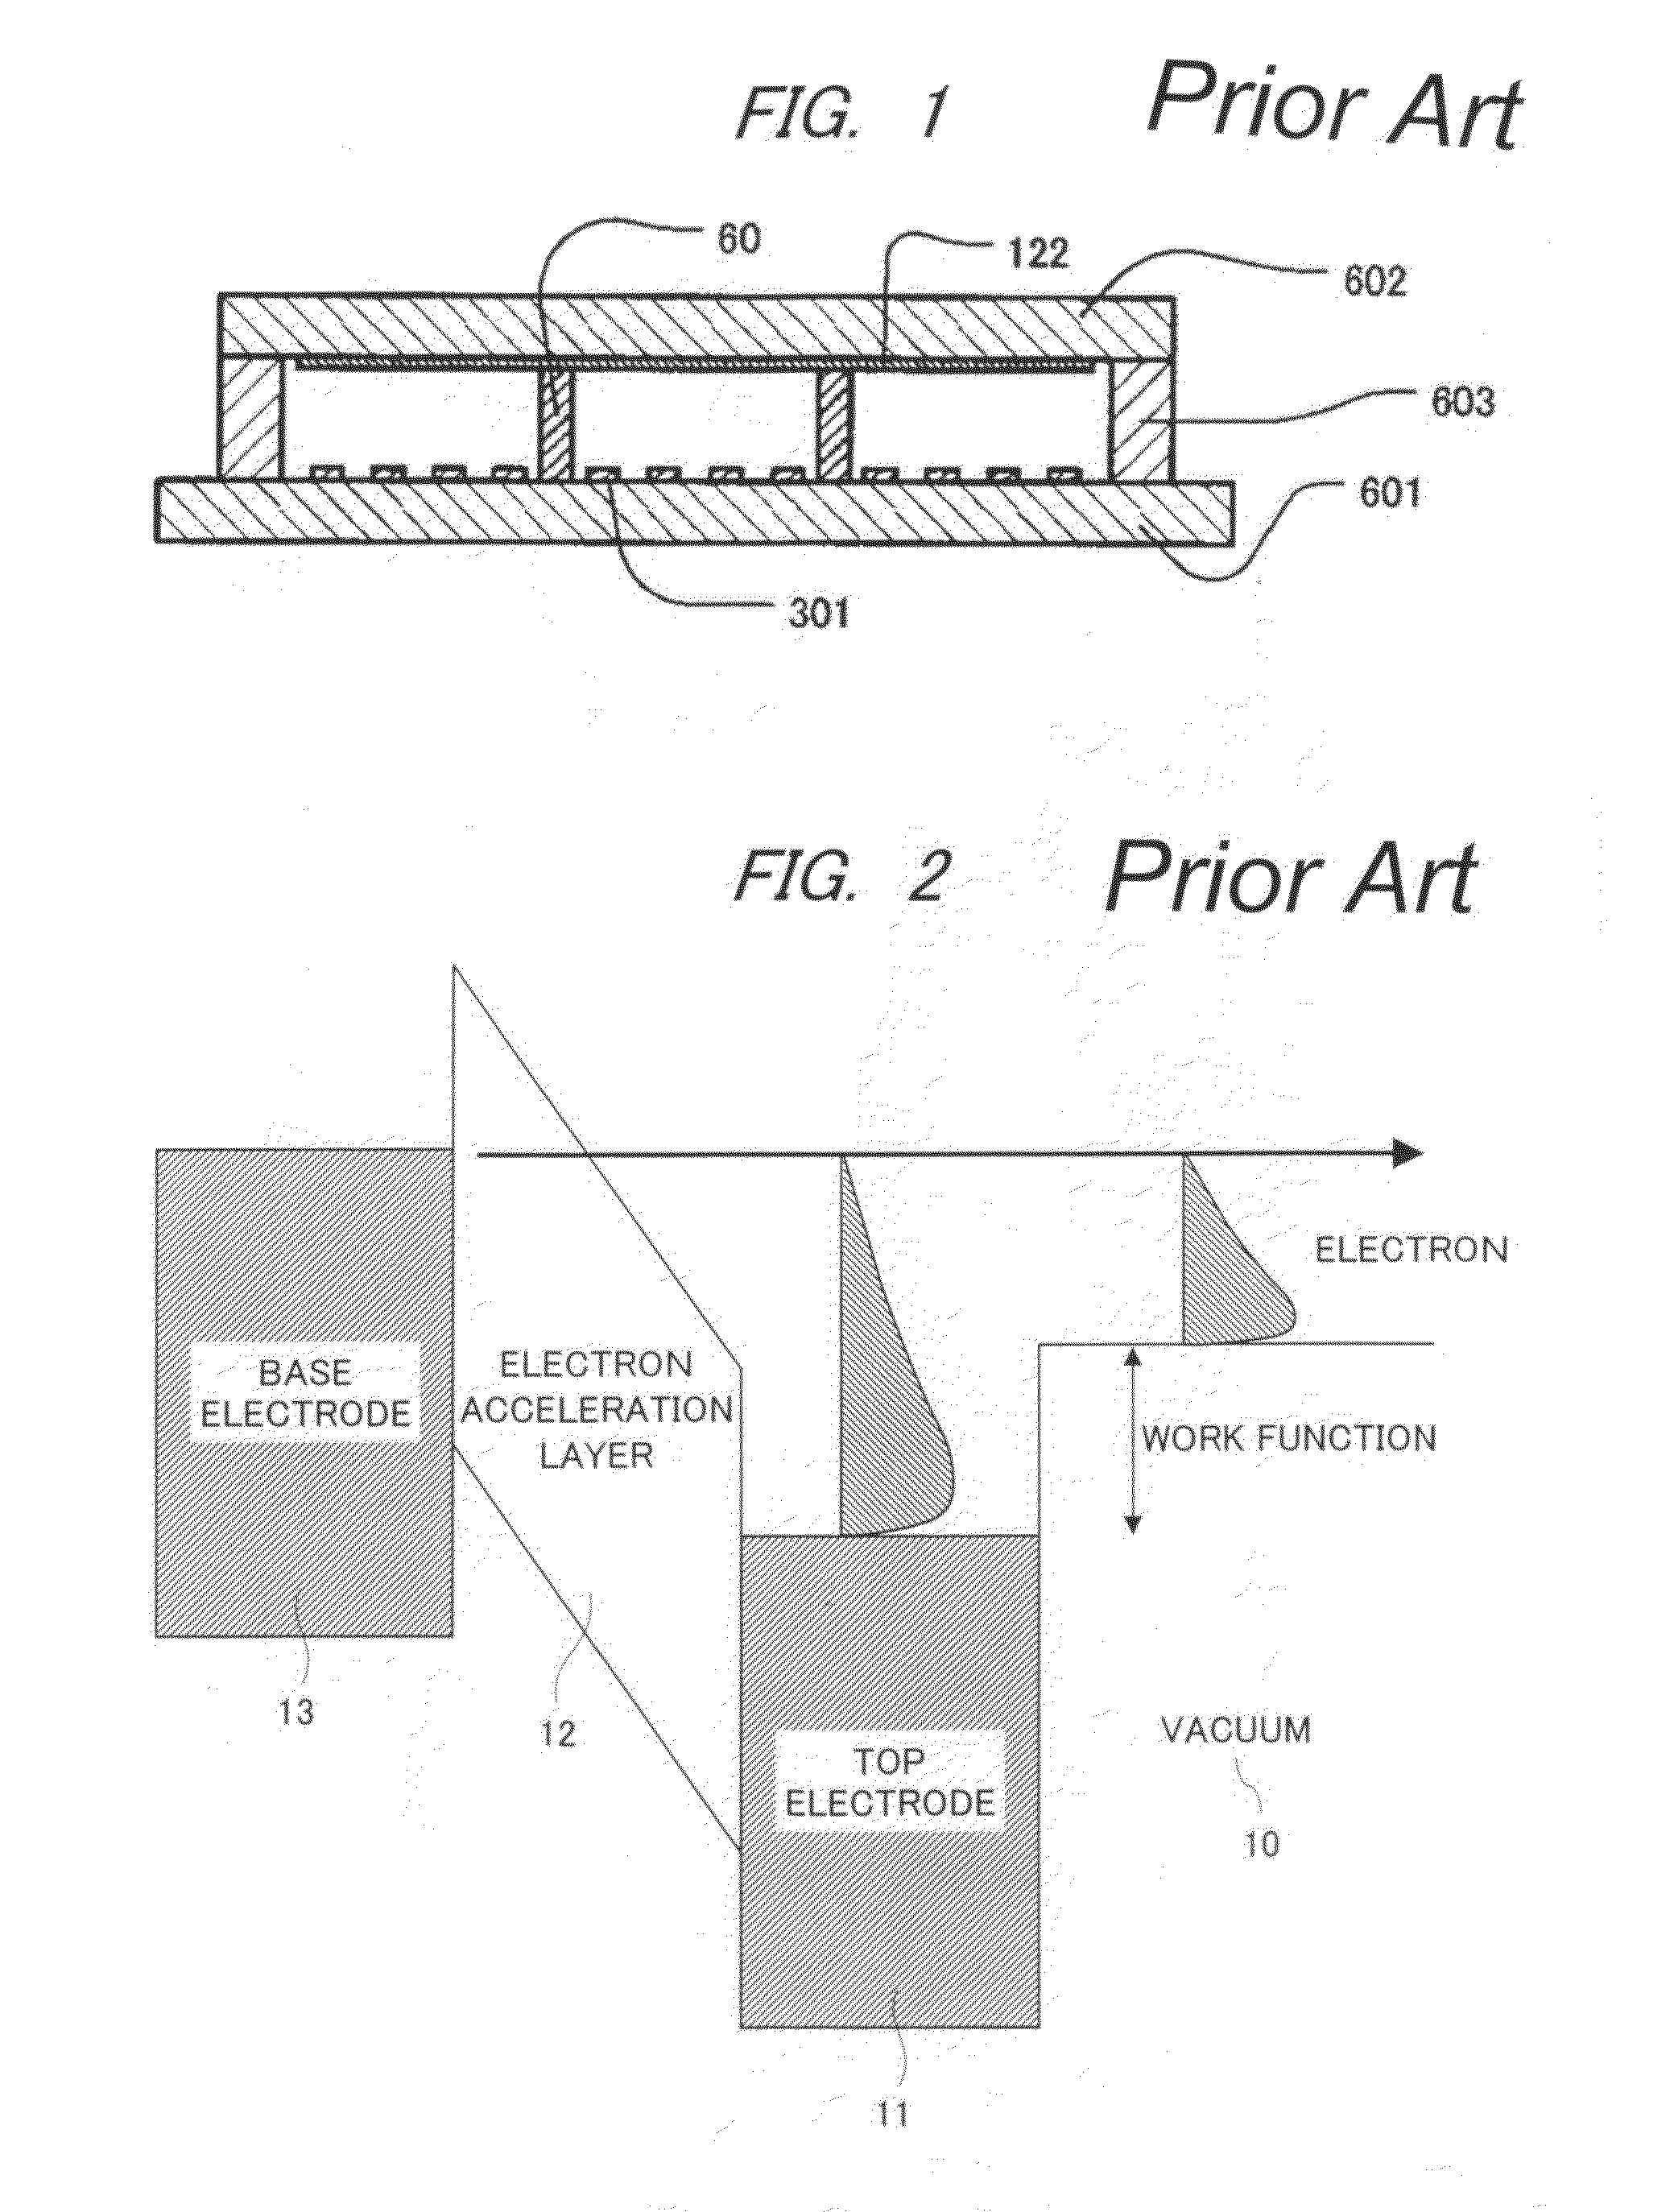 Image display apparatus with particular electron emission region location